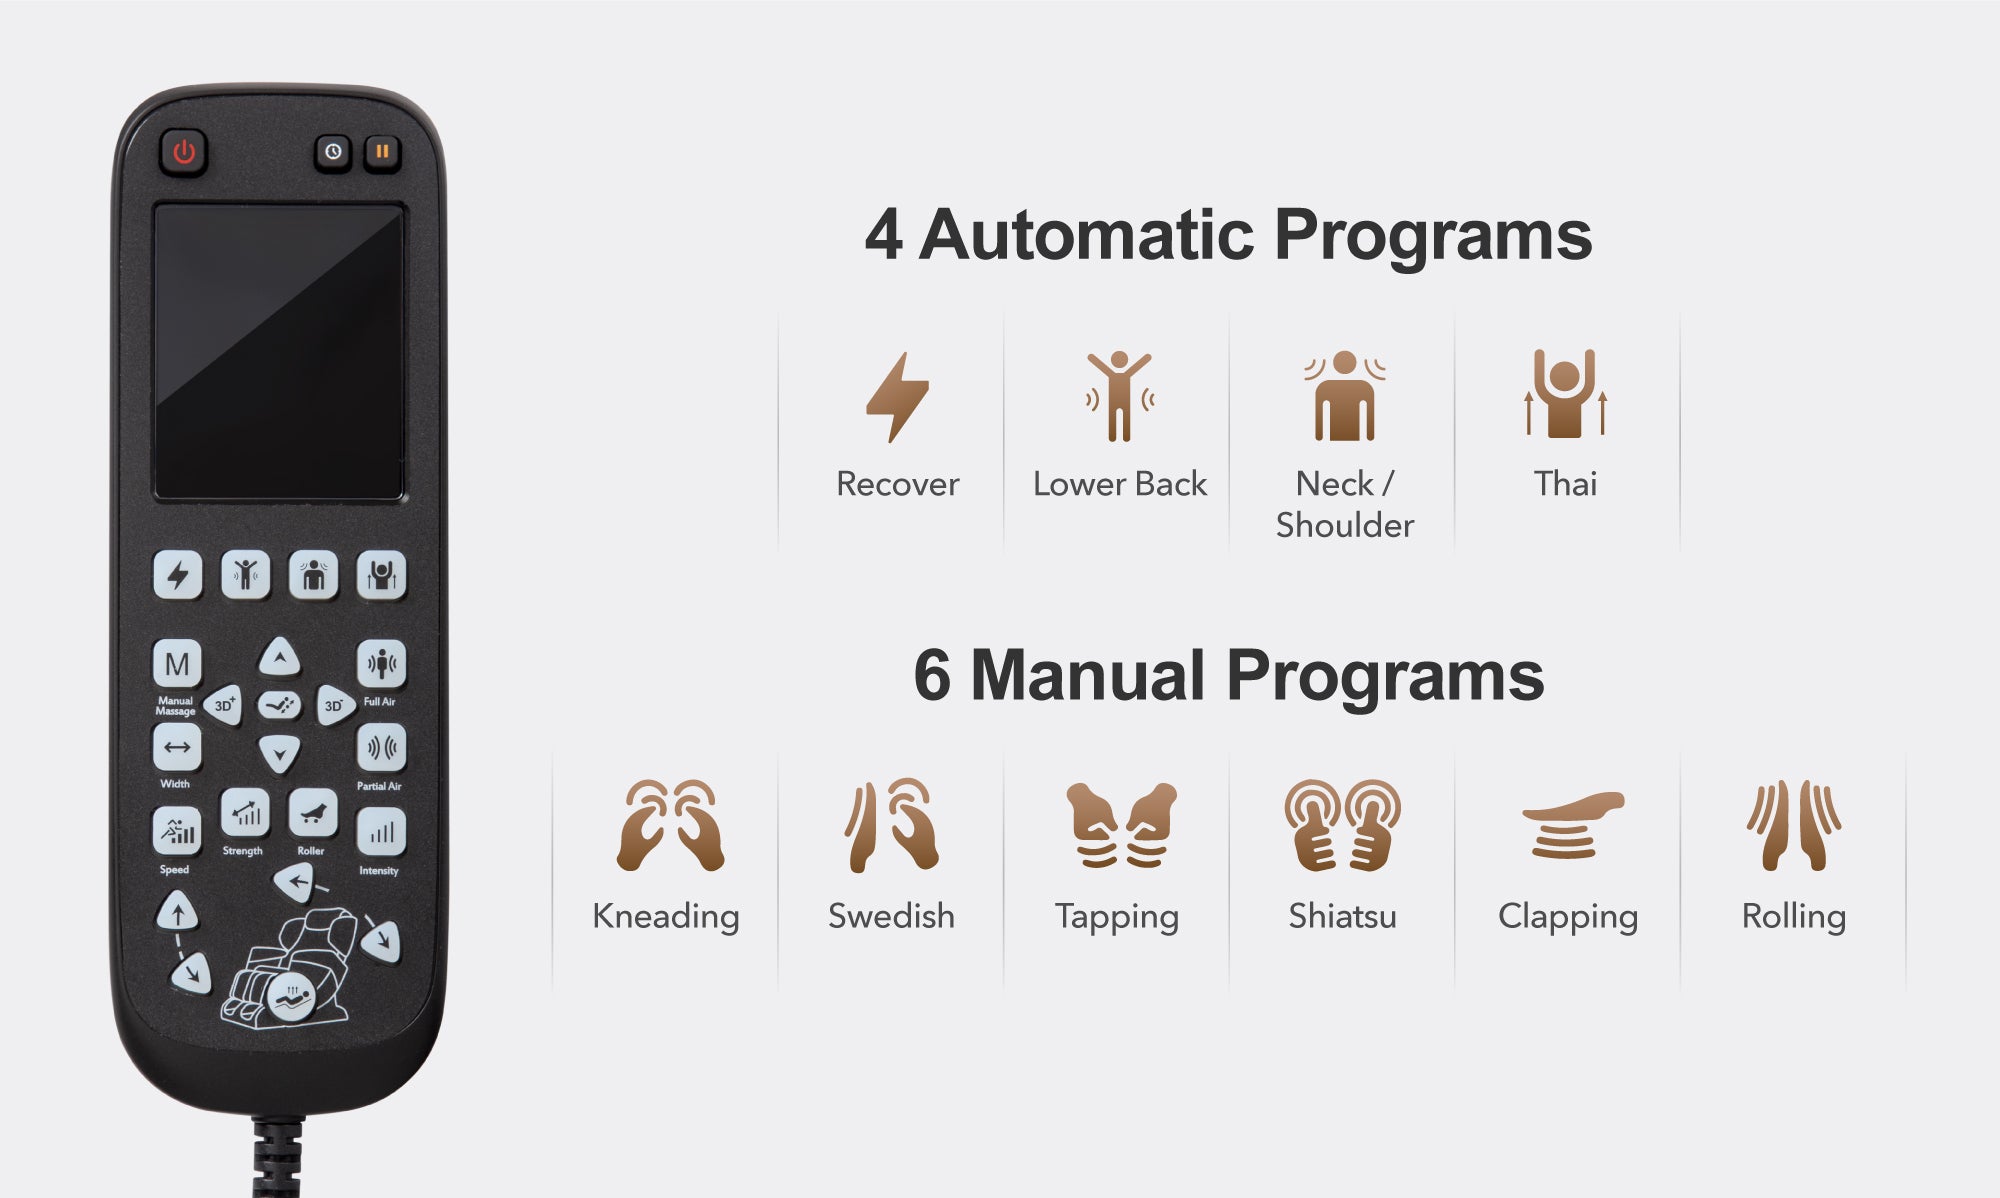 4 Automatic Programs and 6 Manual Programs